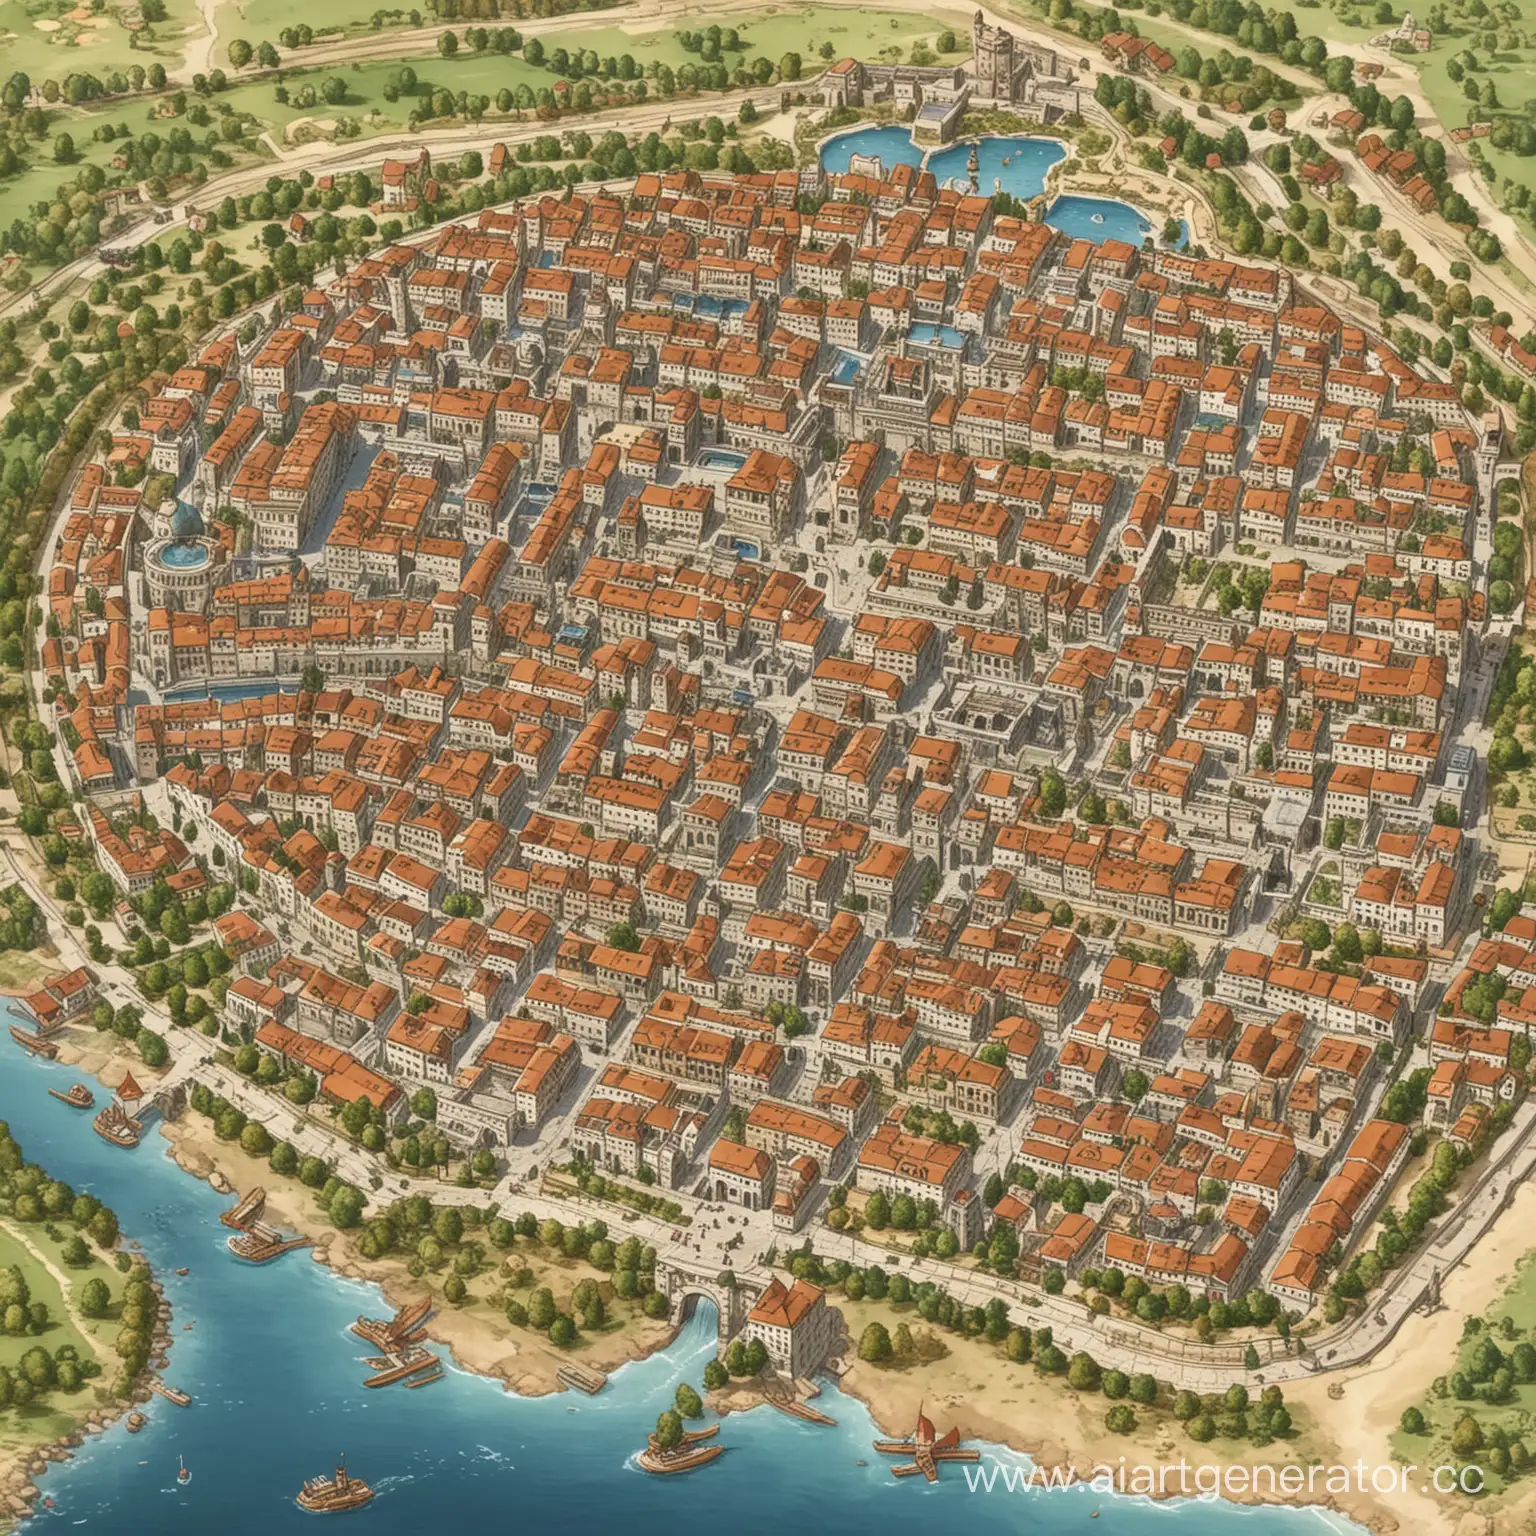 Detailed-City-Map-with-Central-Palace-Stables-Soldier-Quarters-Fountain-Square-and-Varied-Buildings